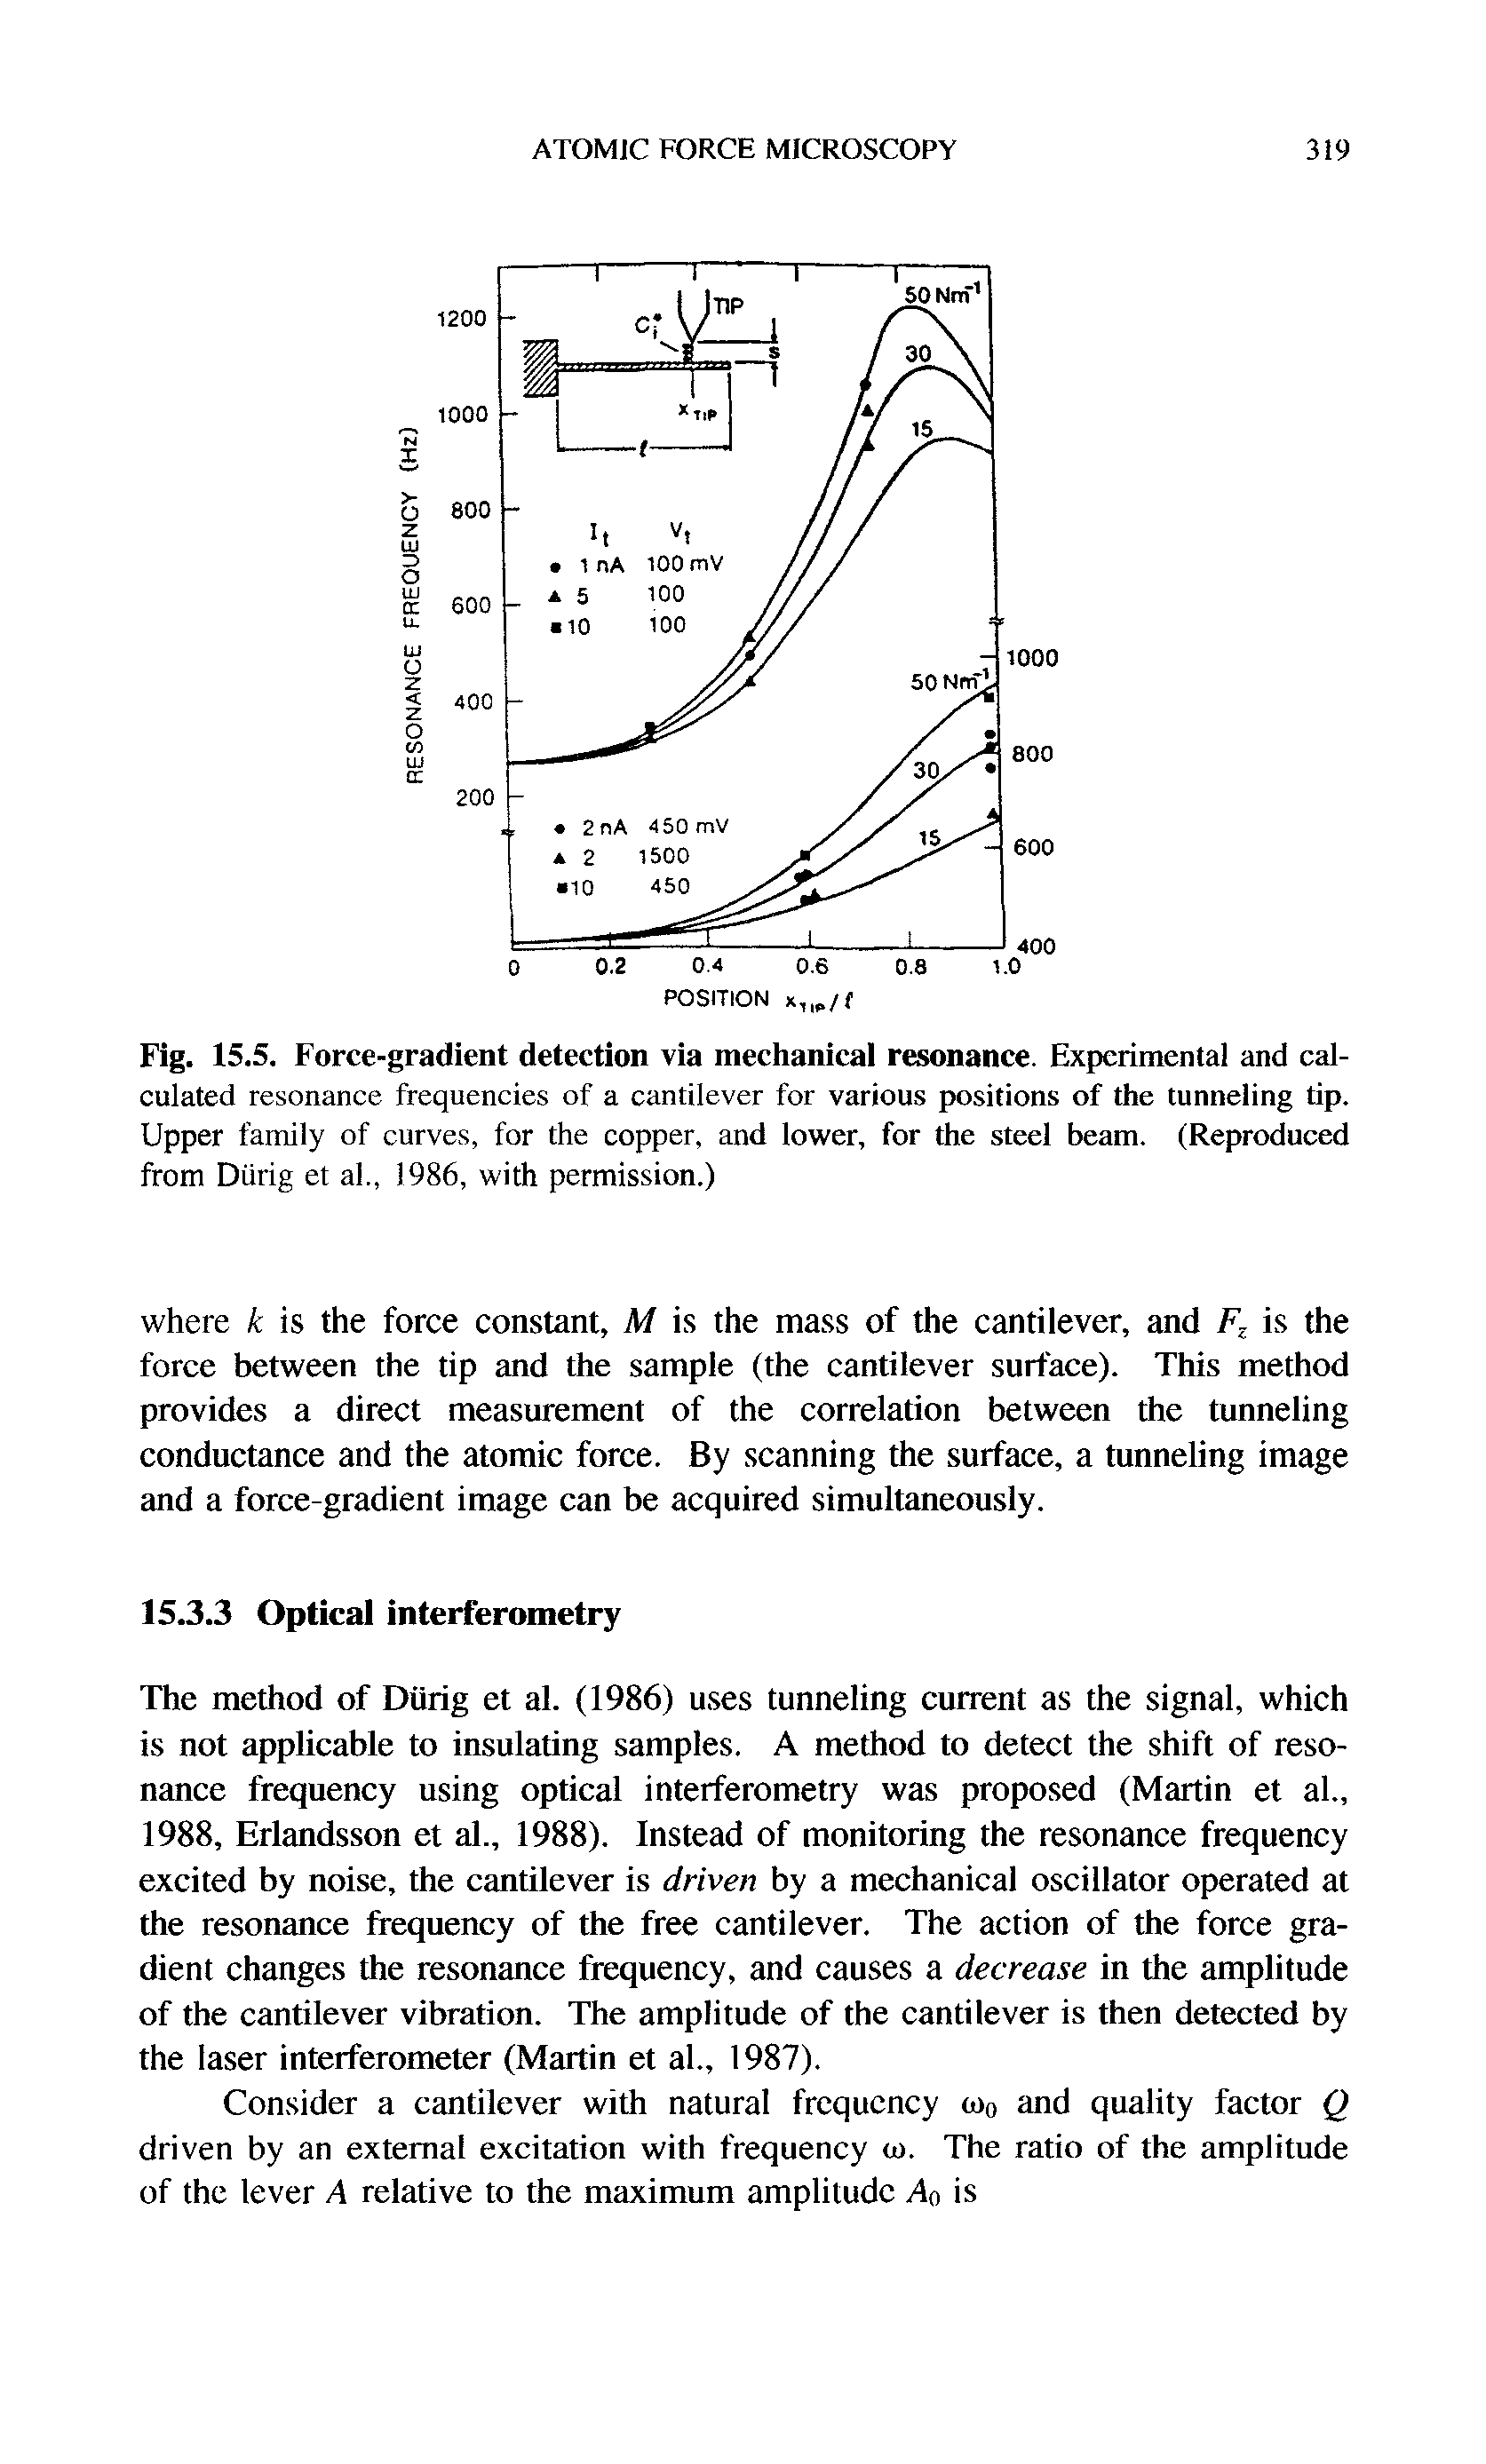 Fig. 15.5. Force-gradient detection via mechanical resonance. Experimental and calculated resonance frequencies of a cantilever for various positions of the tunneling tip. Upper family of curves, for the copper, and lower, for the steel beam. (Reproduced from Diirig et al., 1986, with permission.)...